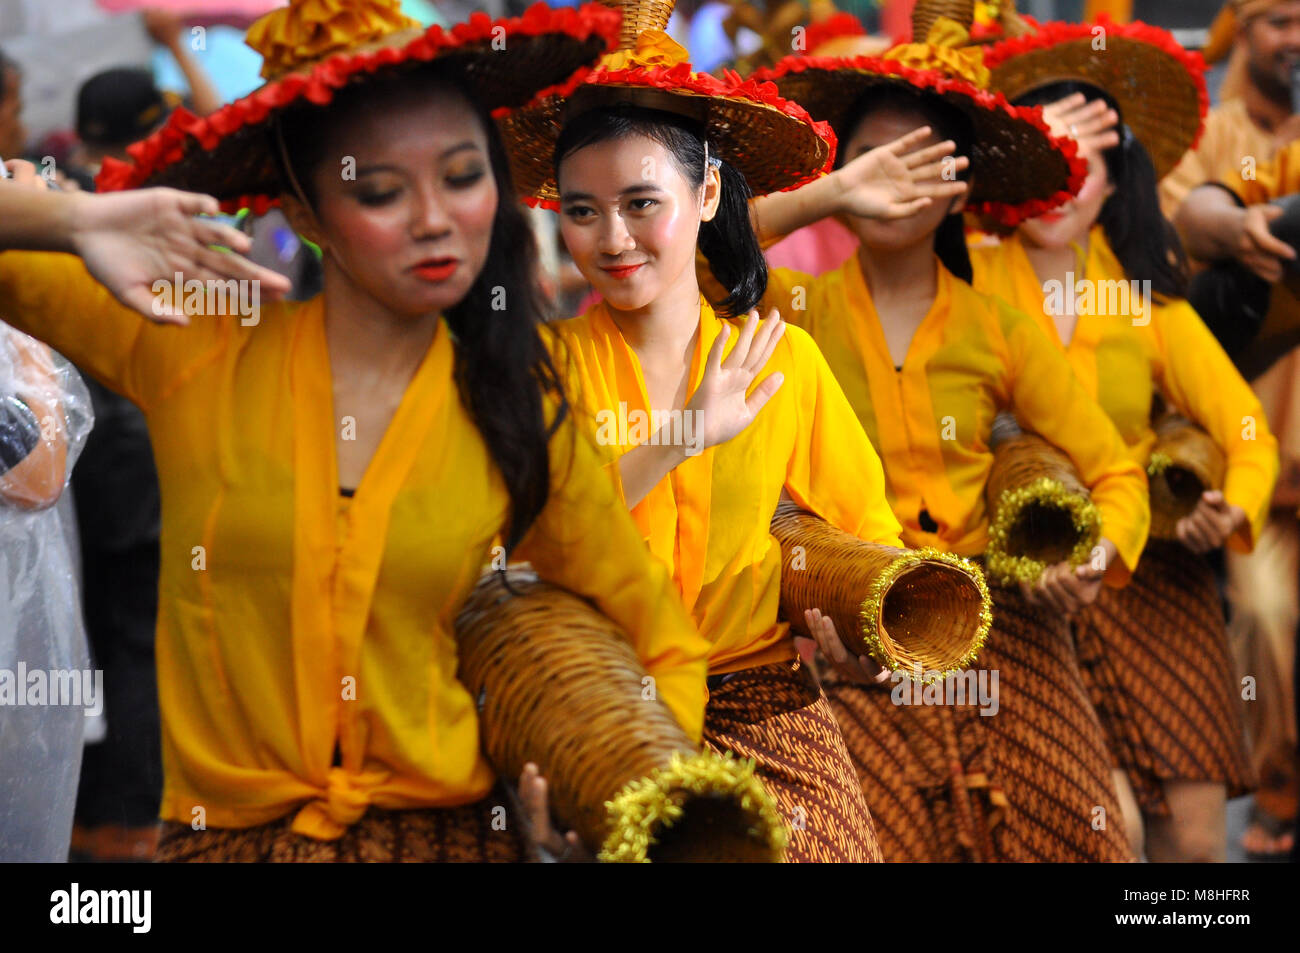 Indonesia: Classical dance cultural heritage Stock Photo